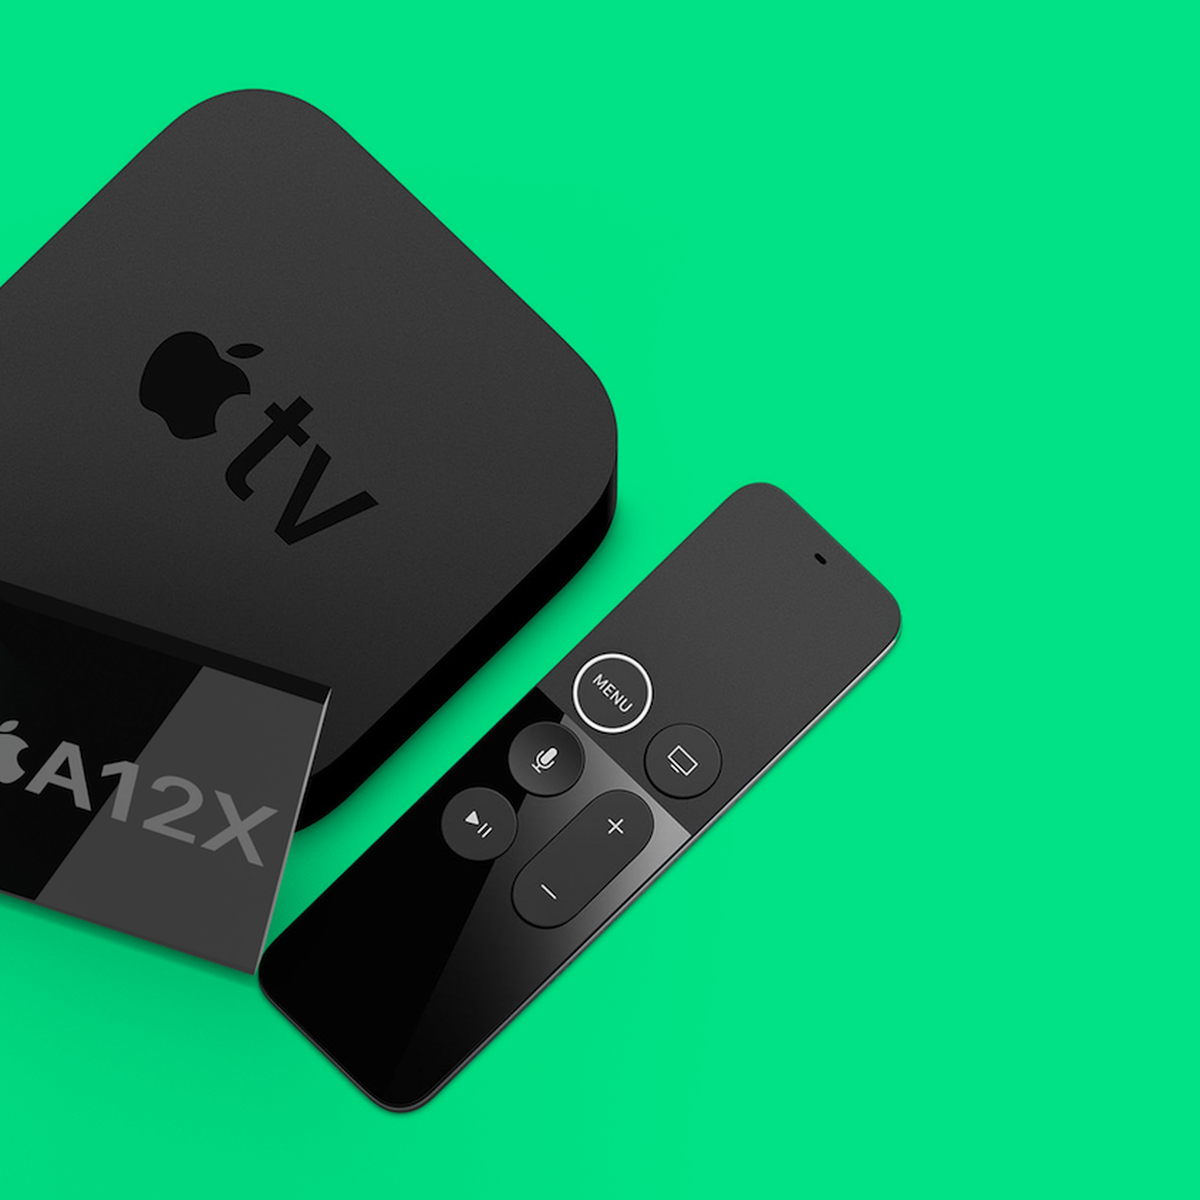 Rumor Suggests New Apple TV 4K With Chip 'Ready to Ship' - MacRumors